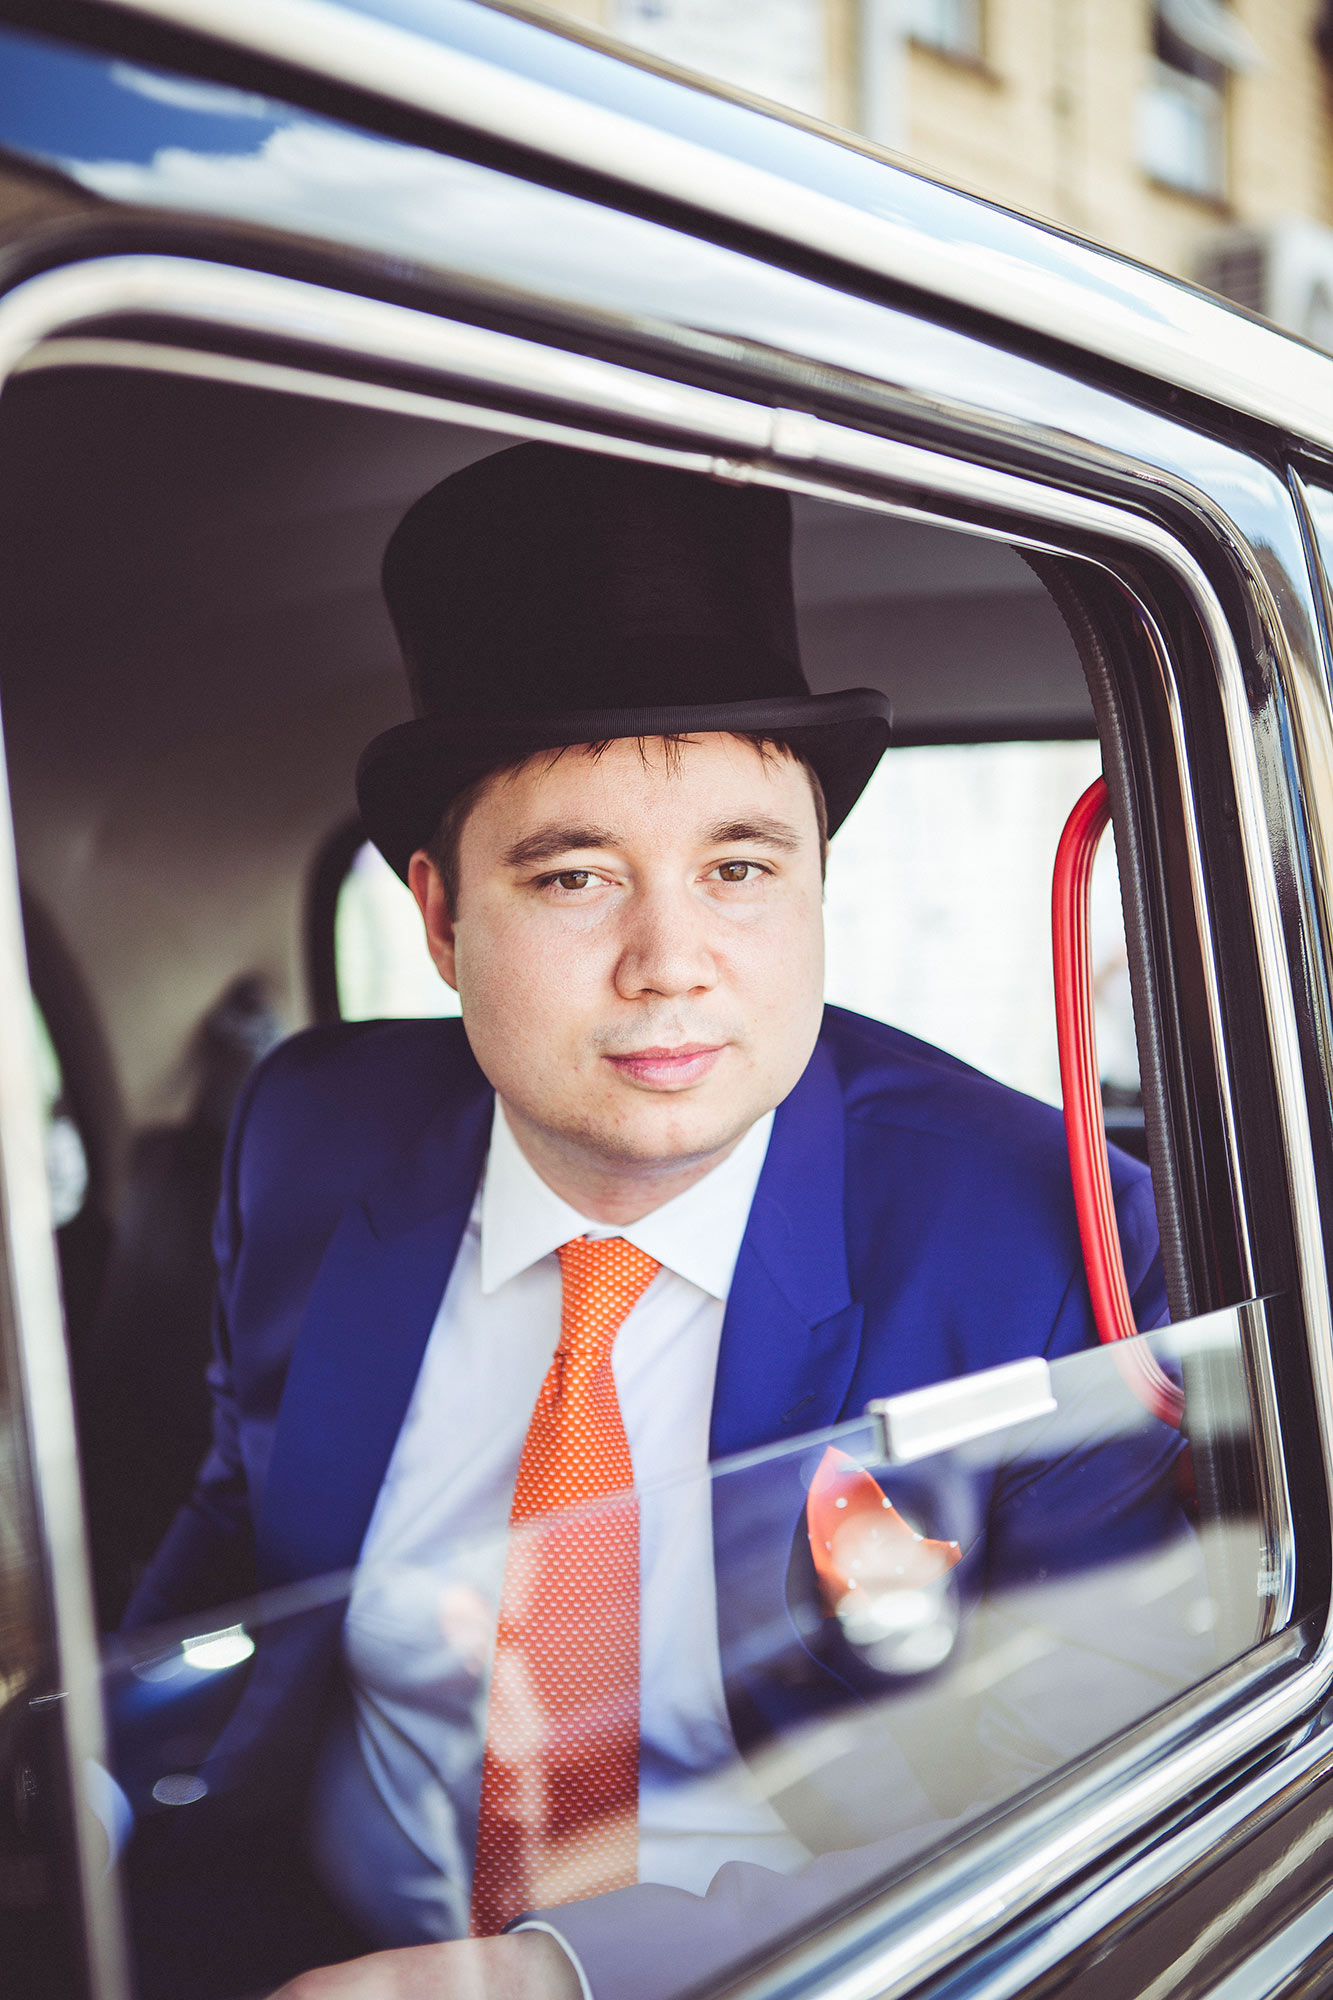  Groom in london taxi wearing a top hat 